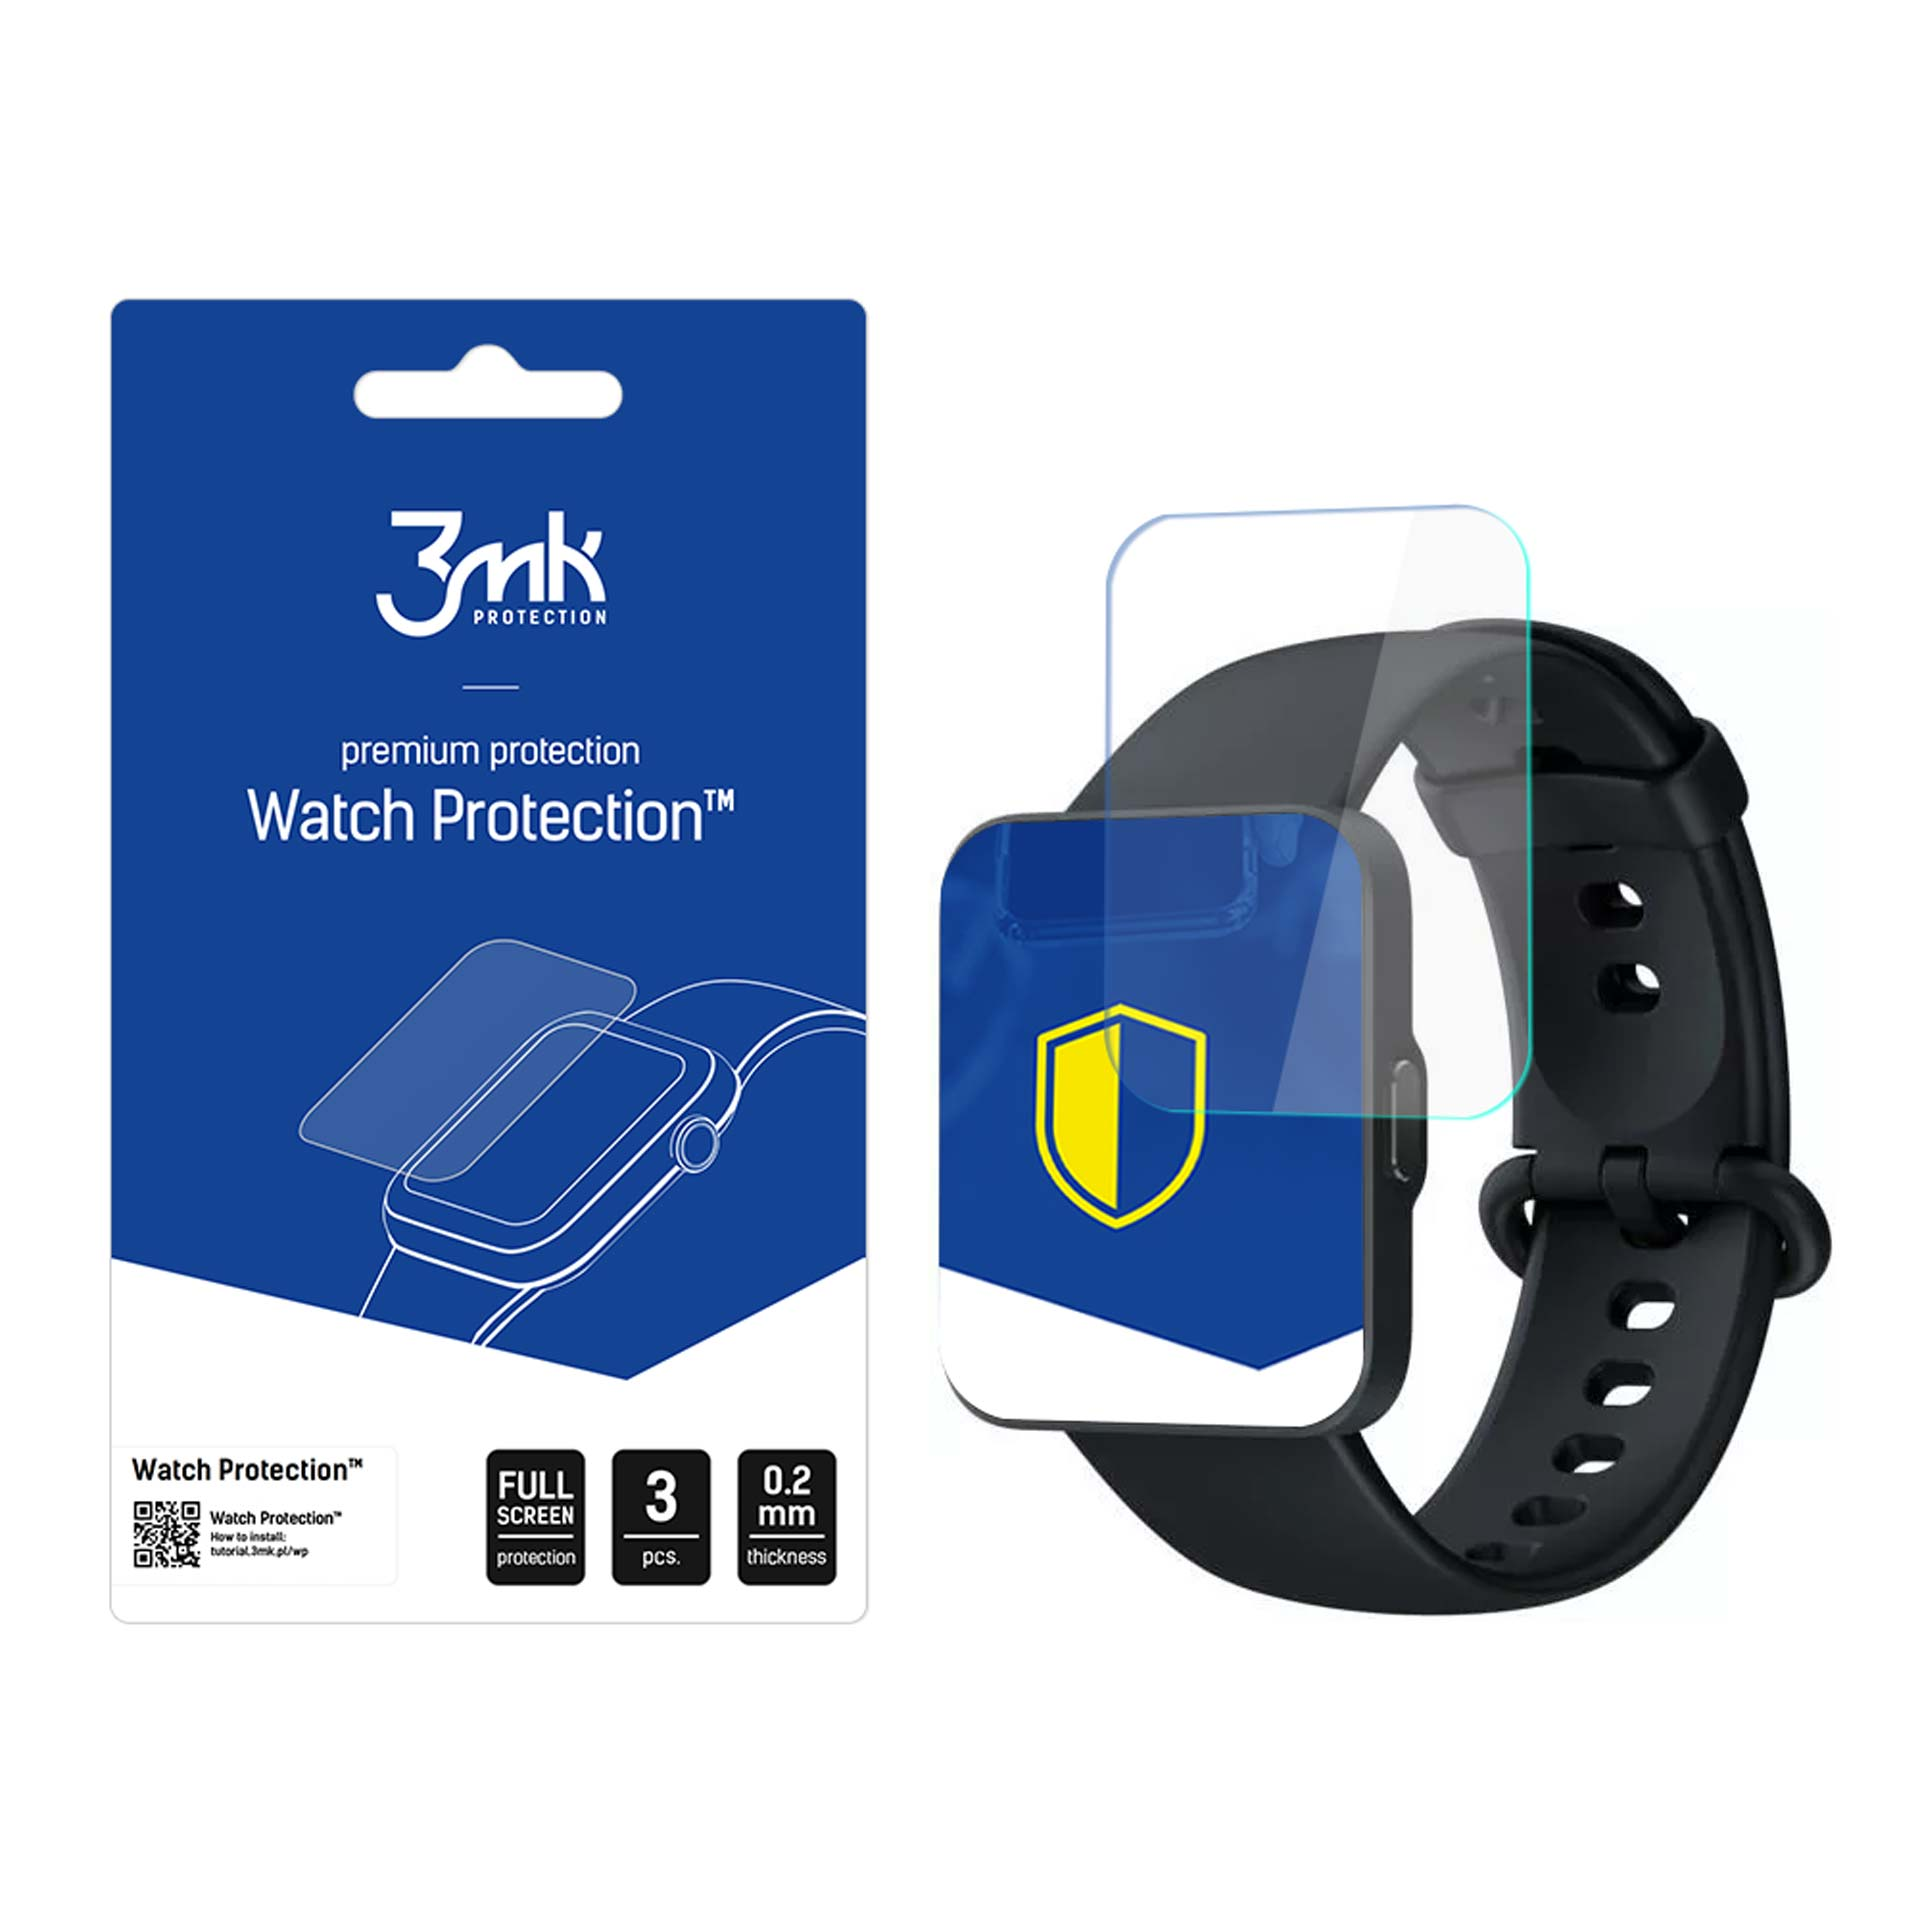 Redmi - 3MK Watch Redmi 3mk Watch Redmi Folie(für 3) v. Watch Protection ARC+ 3